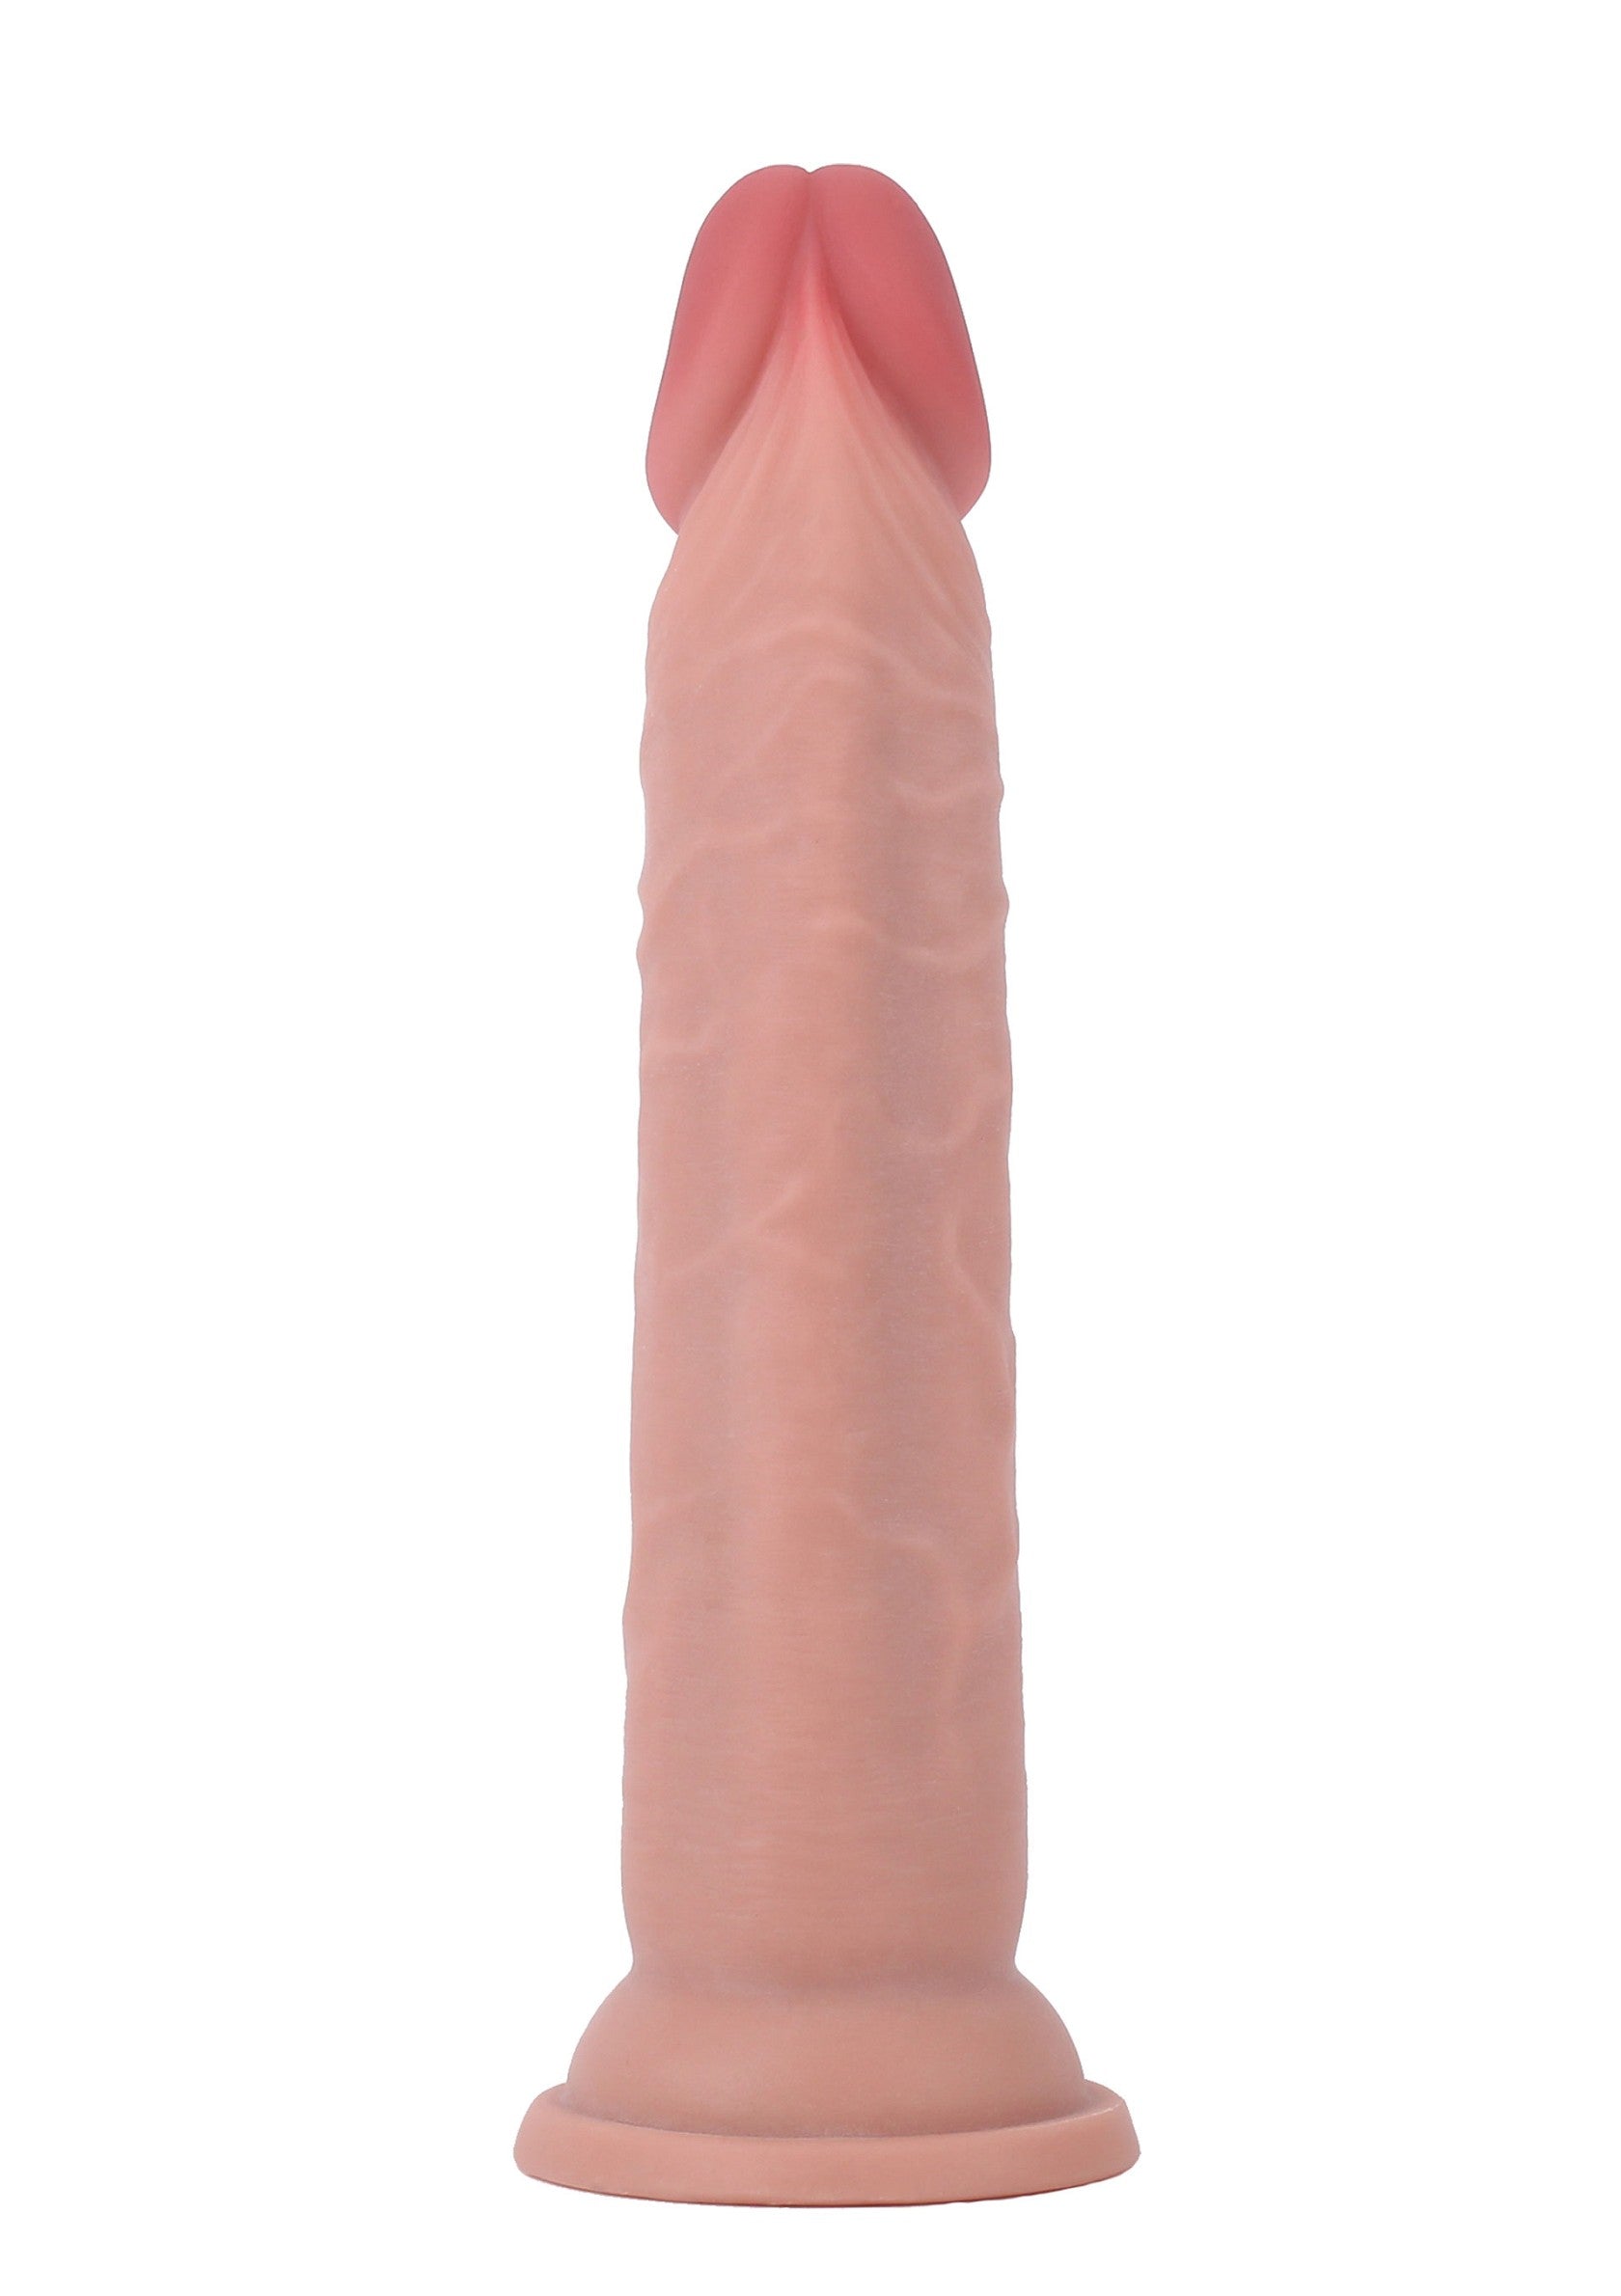 ToyJoy Get Real Deluxe Dual Density Dong 8' SKIN - 4